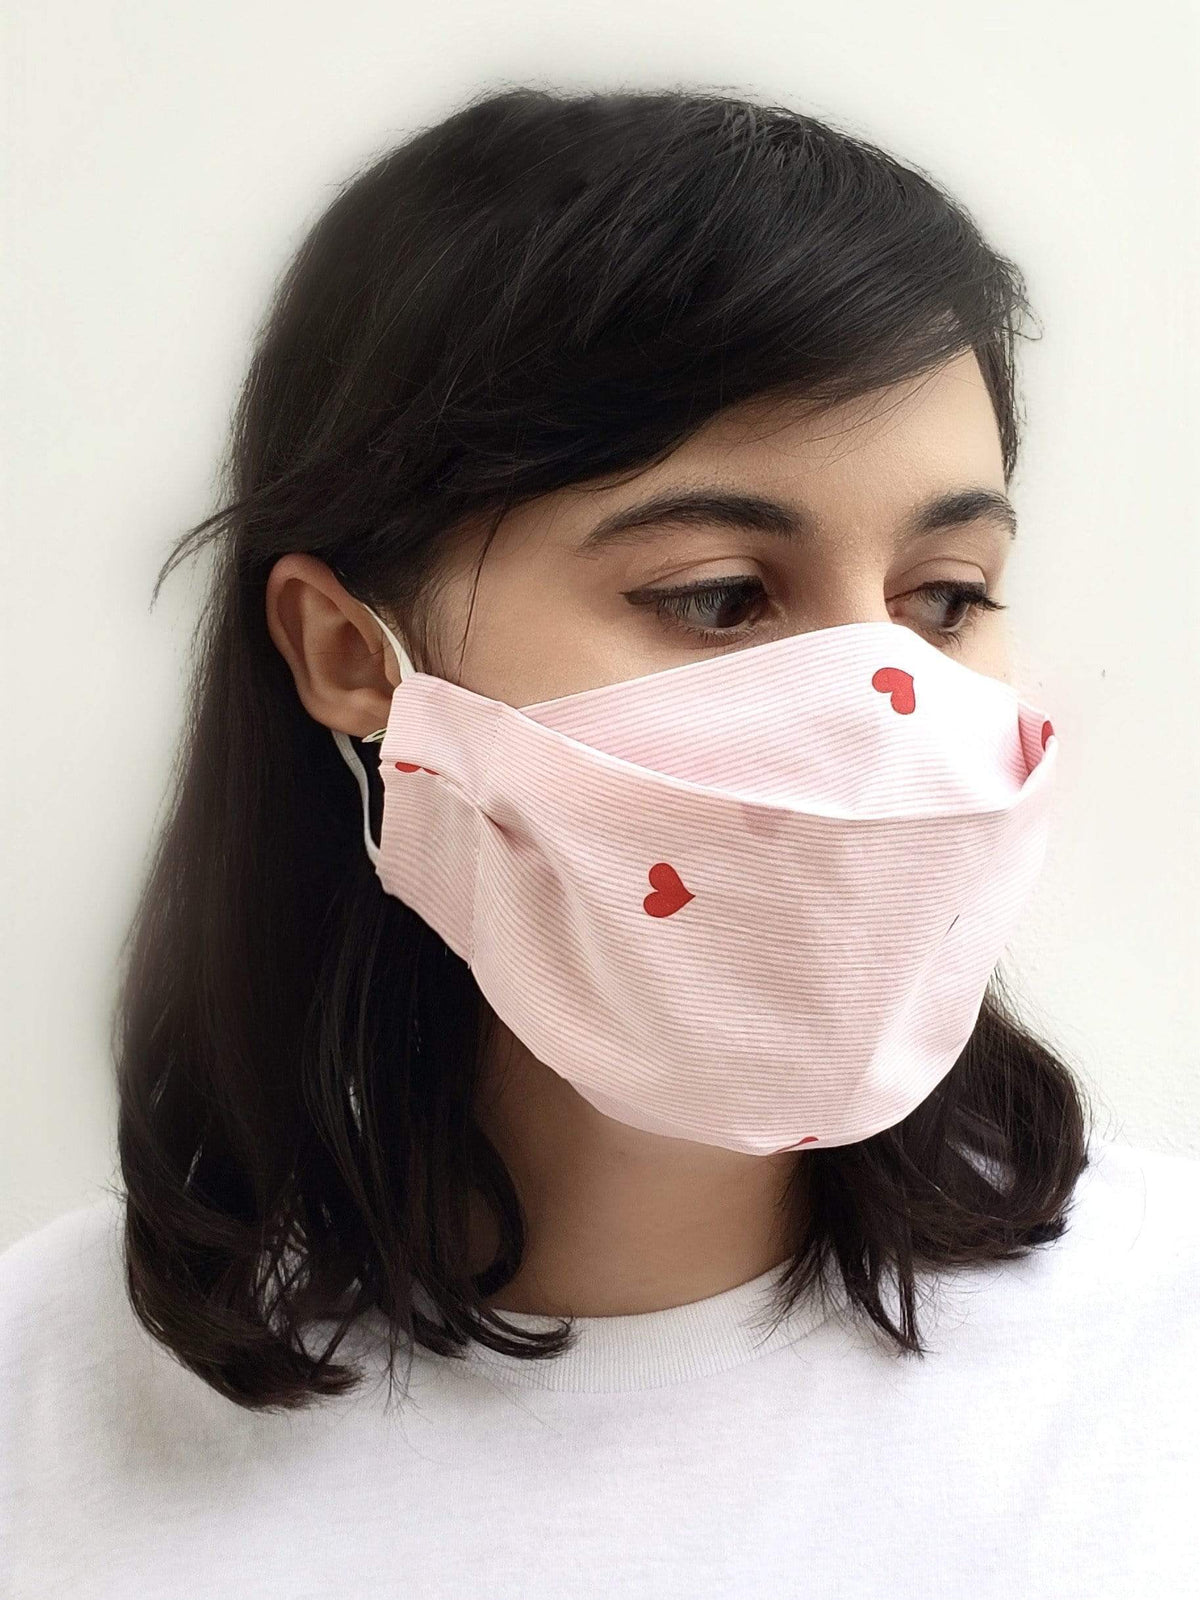 Box Pleated Face Masks Red And Black Gingham (Box Pleated Mask With Filter Pocket) - Chloe Dao